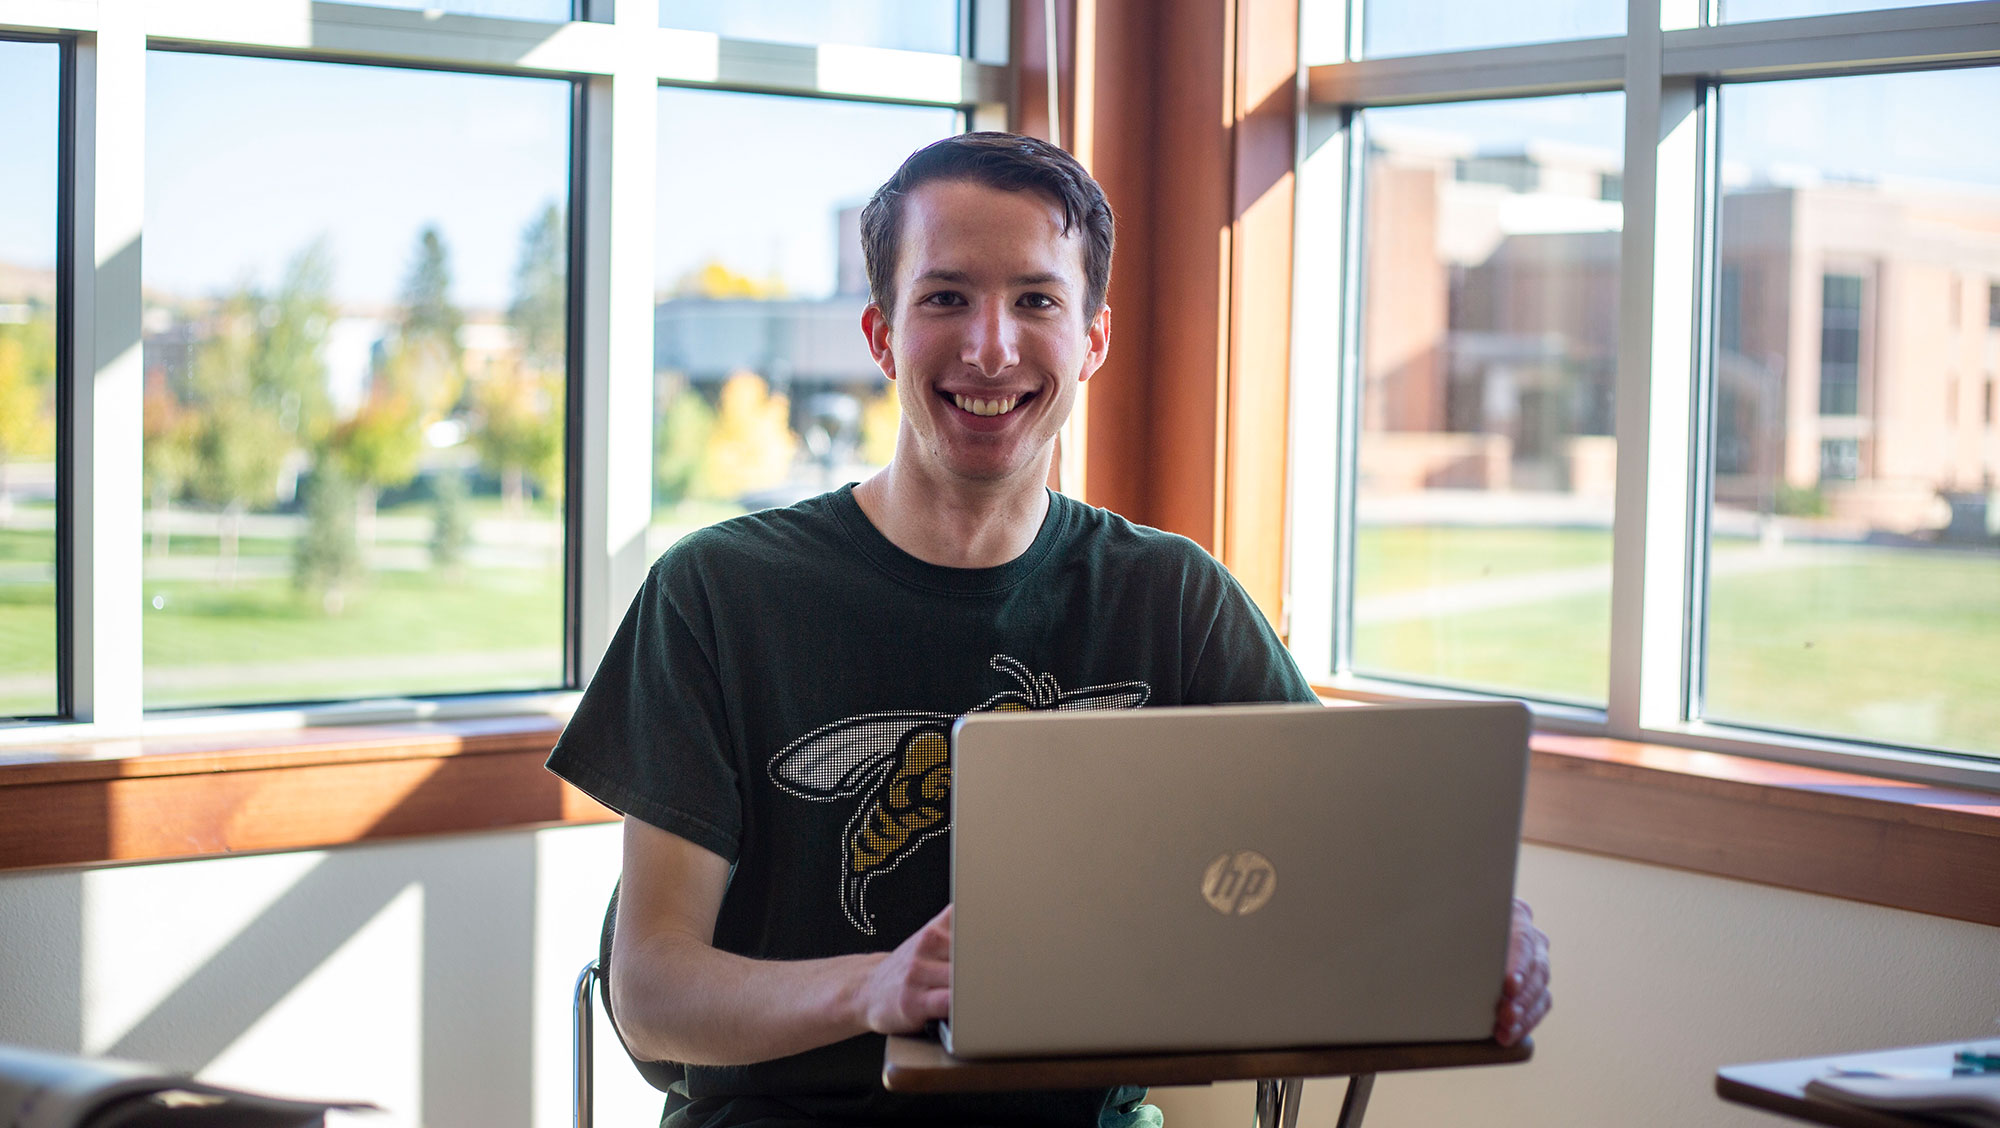 BHSU student smiling while sitting at a table with a laptop.